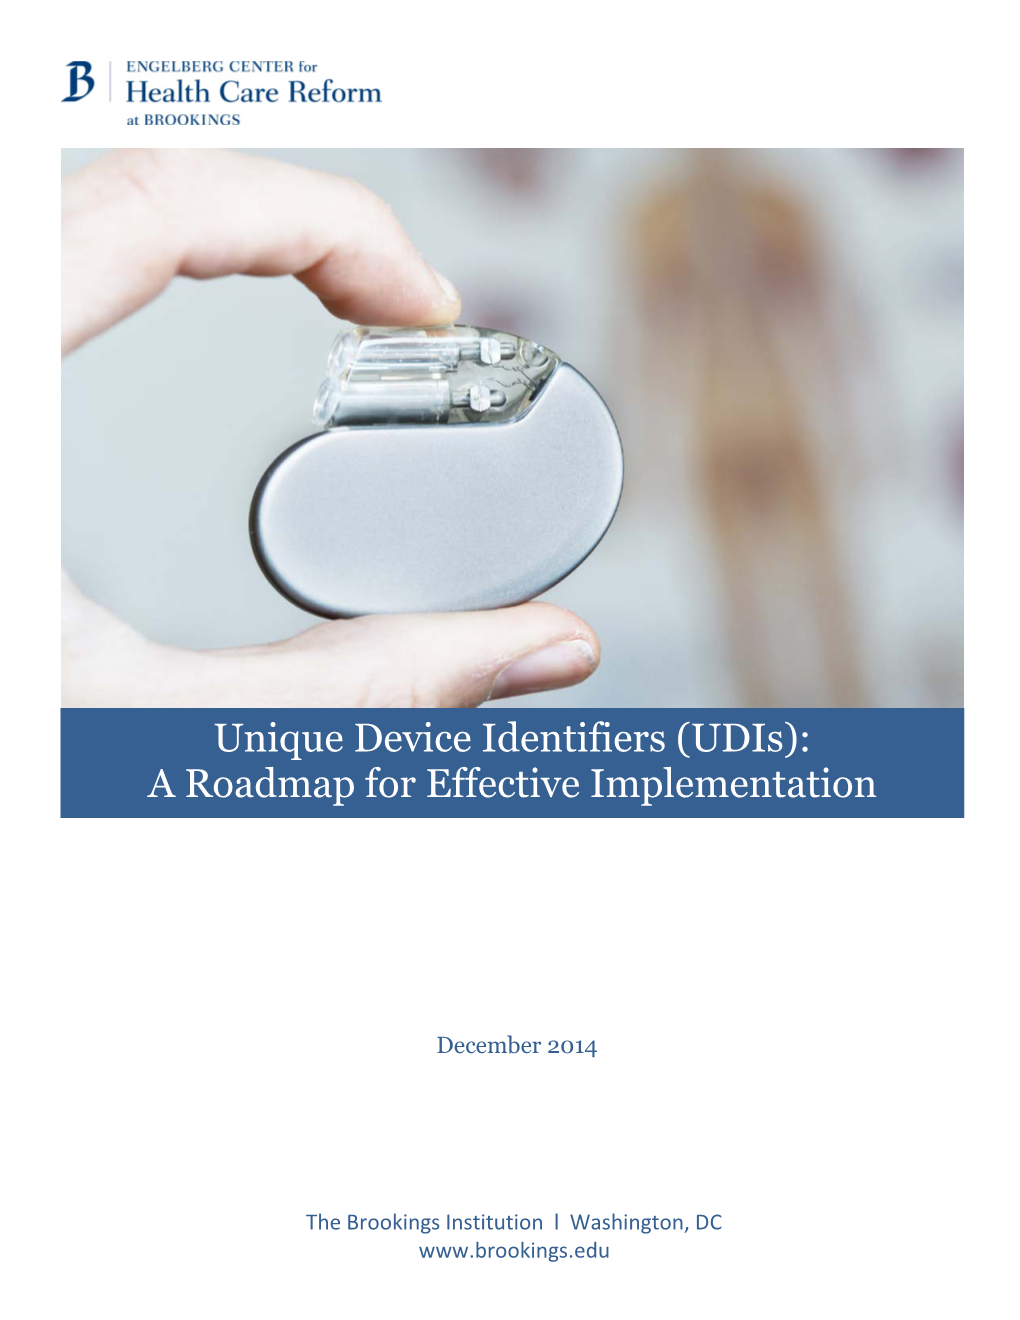 UDI Implementation Roadmap © the Brookings Institution, 2014